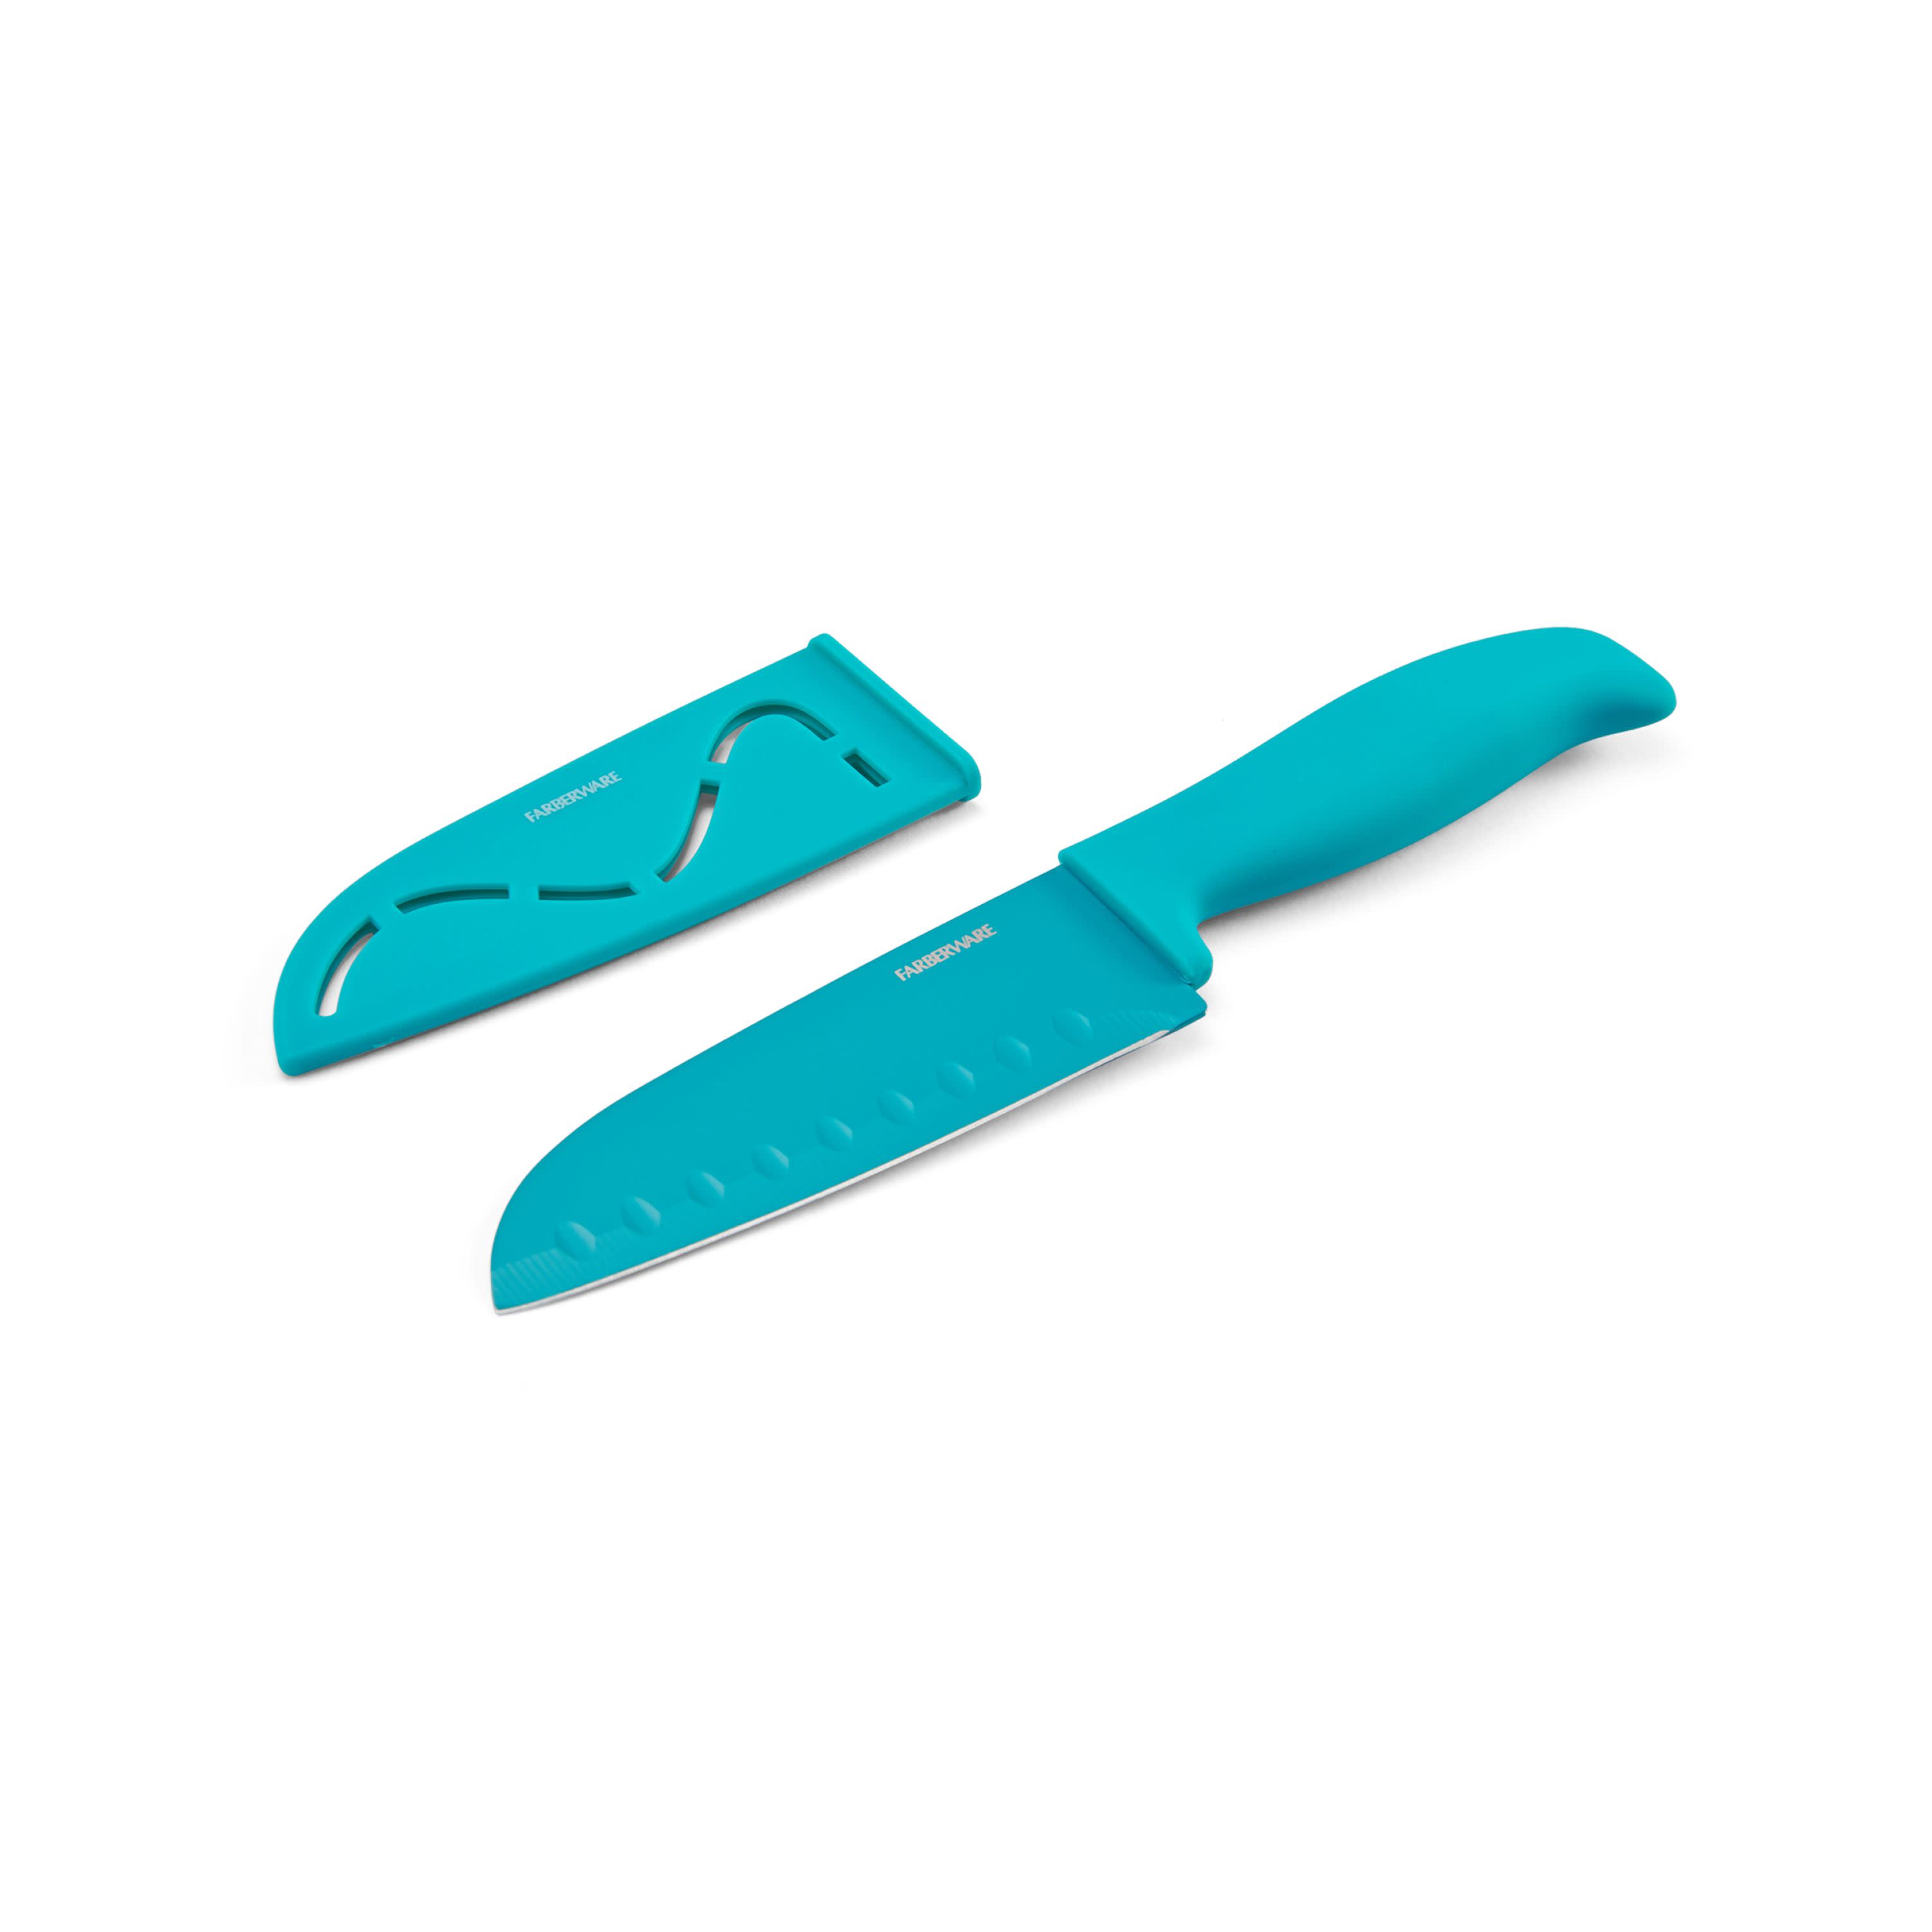 Farberware Soft Grip Slice and Dice Knife, 7-Inch, Teal